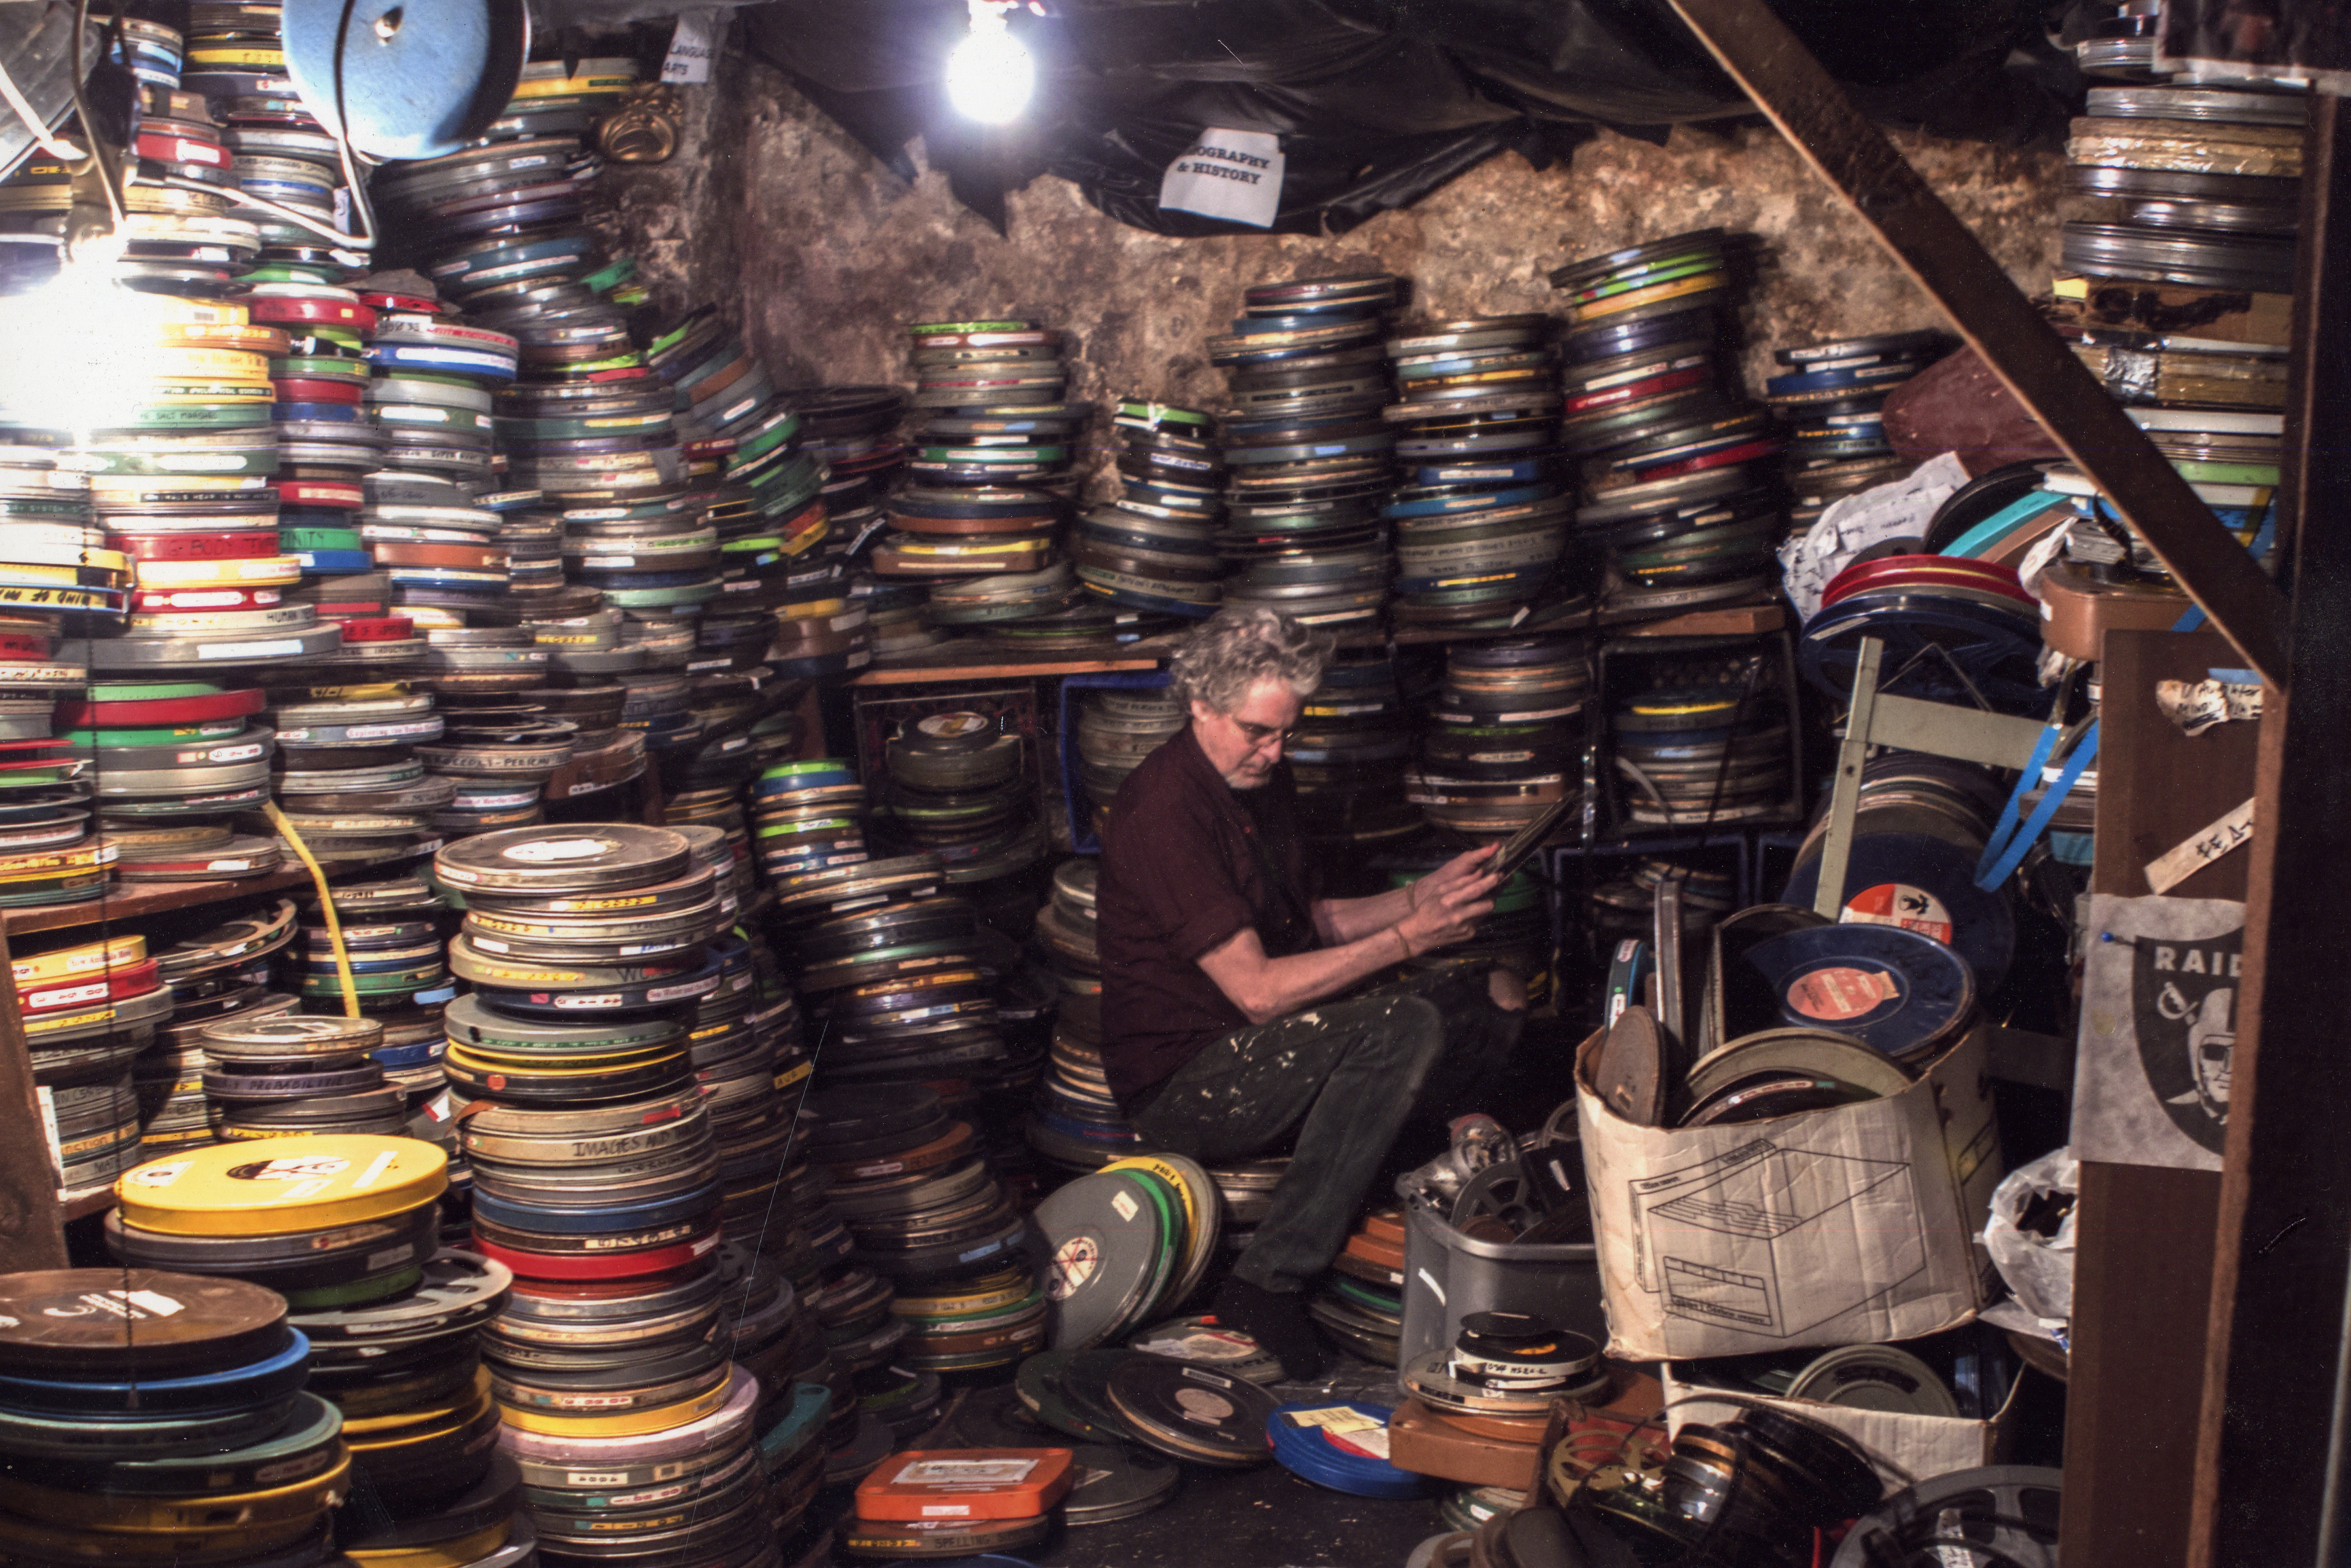 Experimental filmmaker Craig Baldwin surrounded by cans of film reels